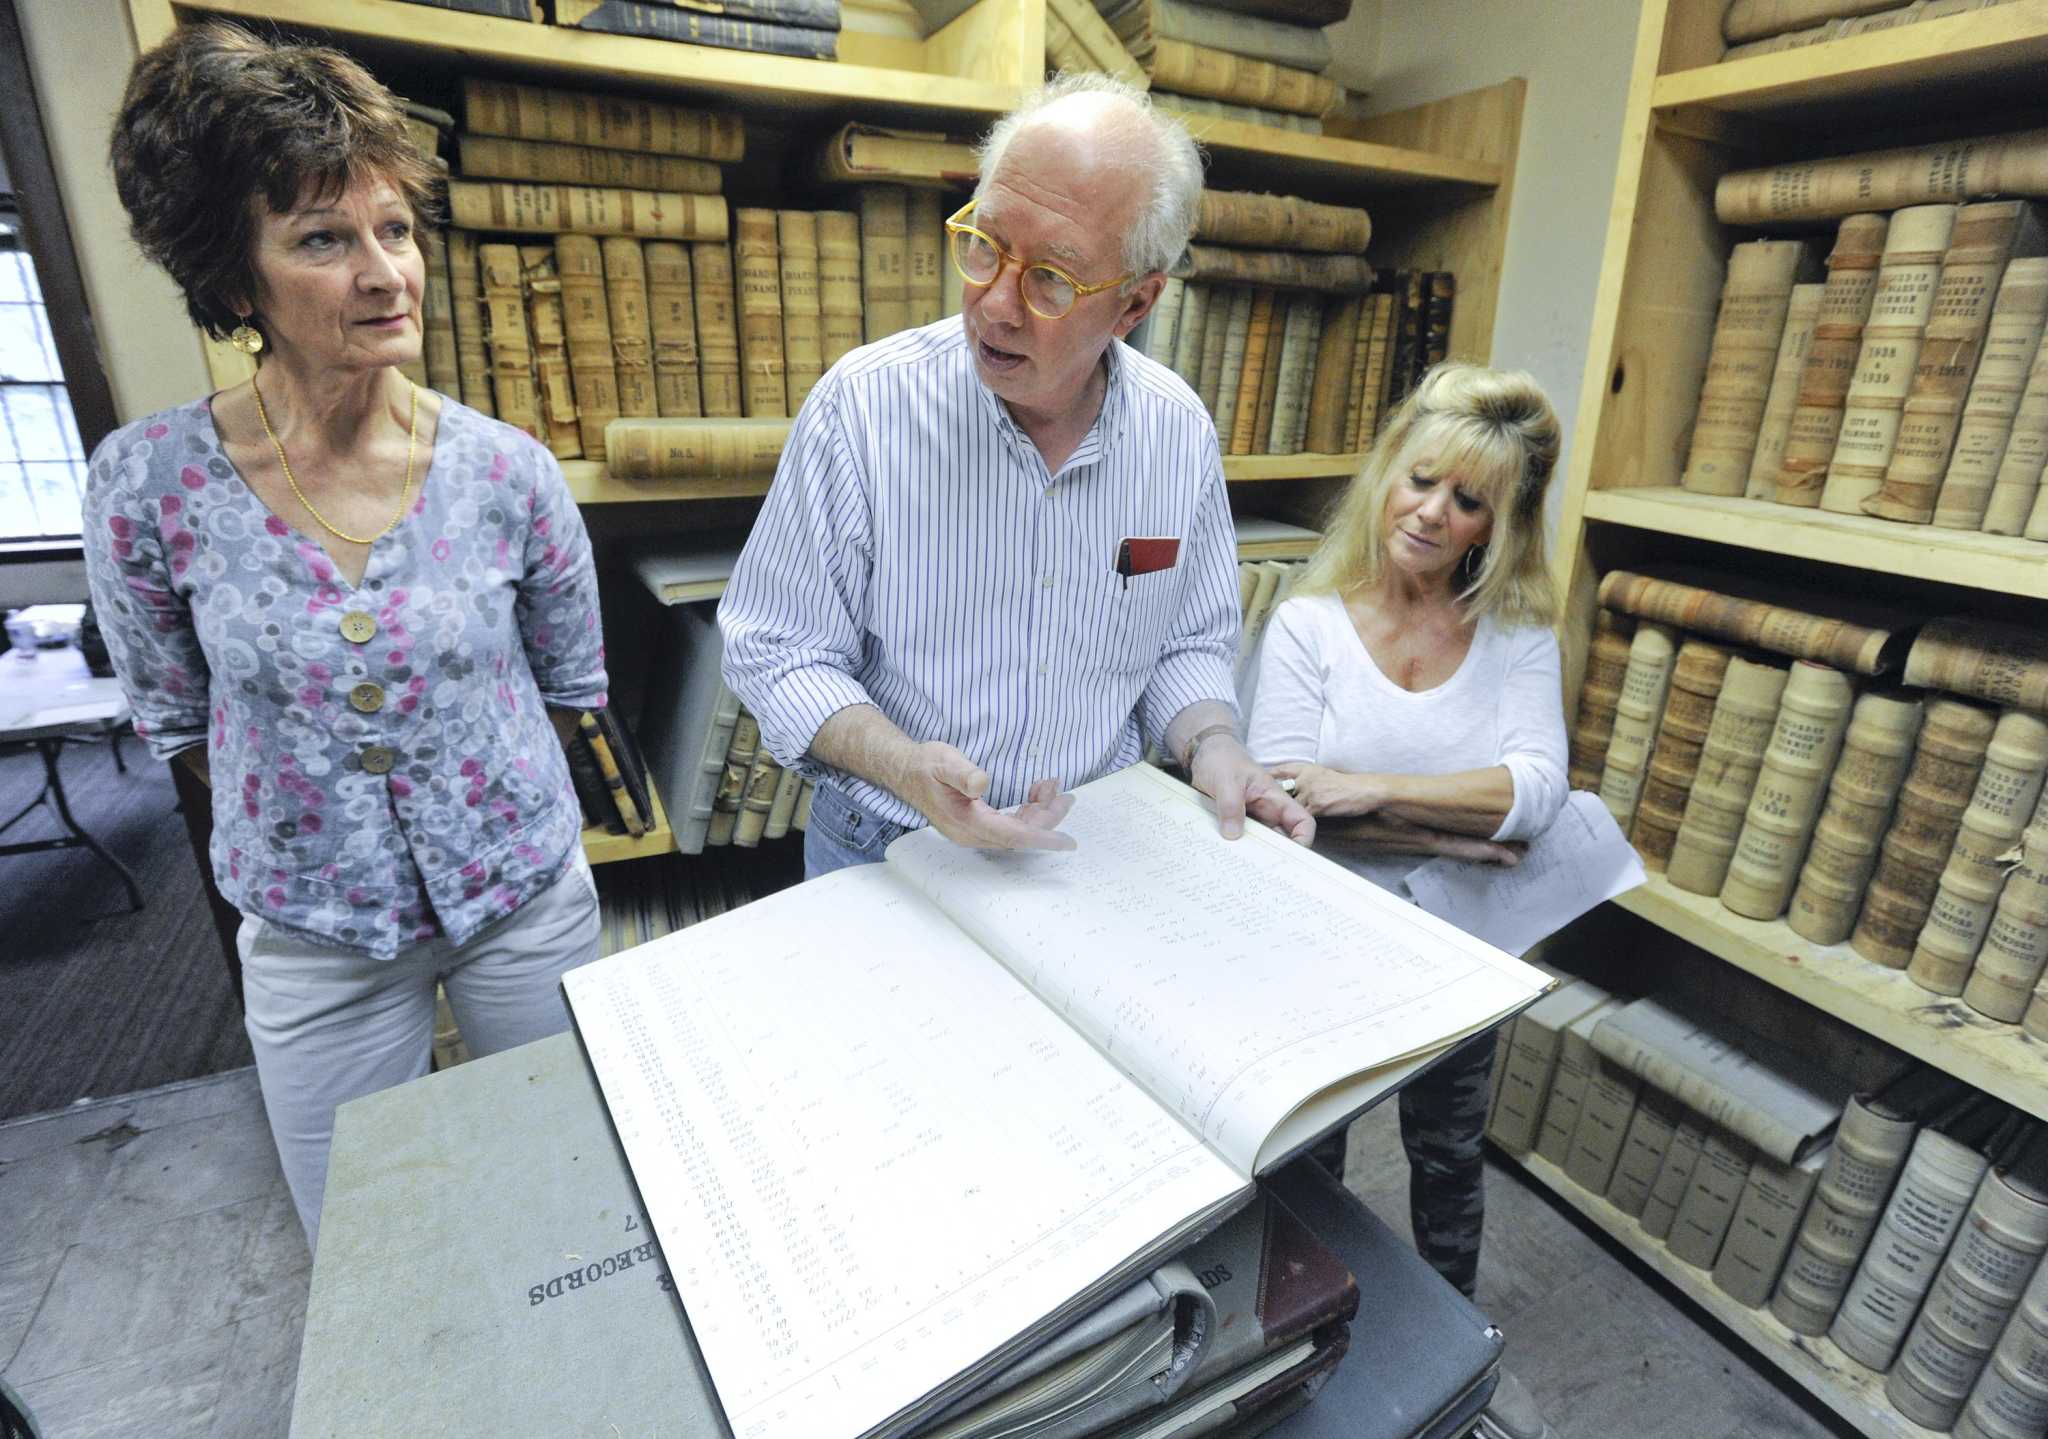 Stamford town clerk works to save books heavy with history